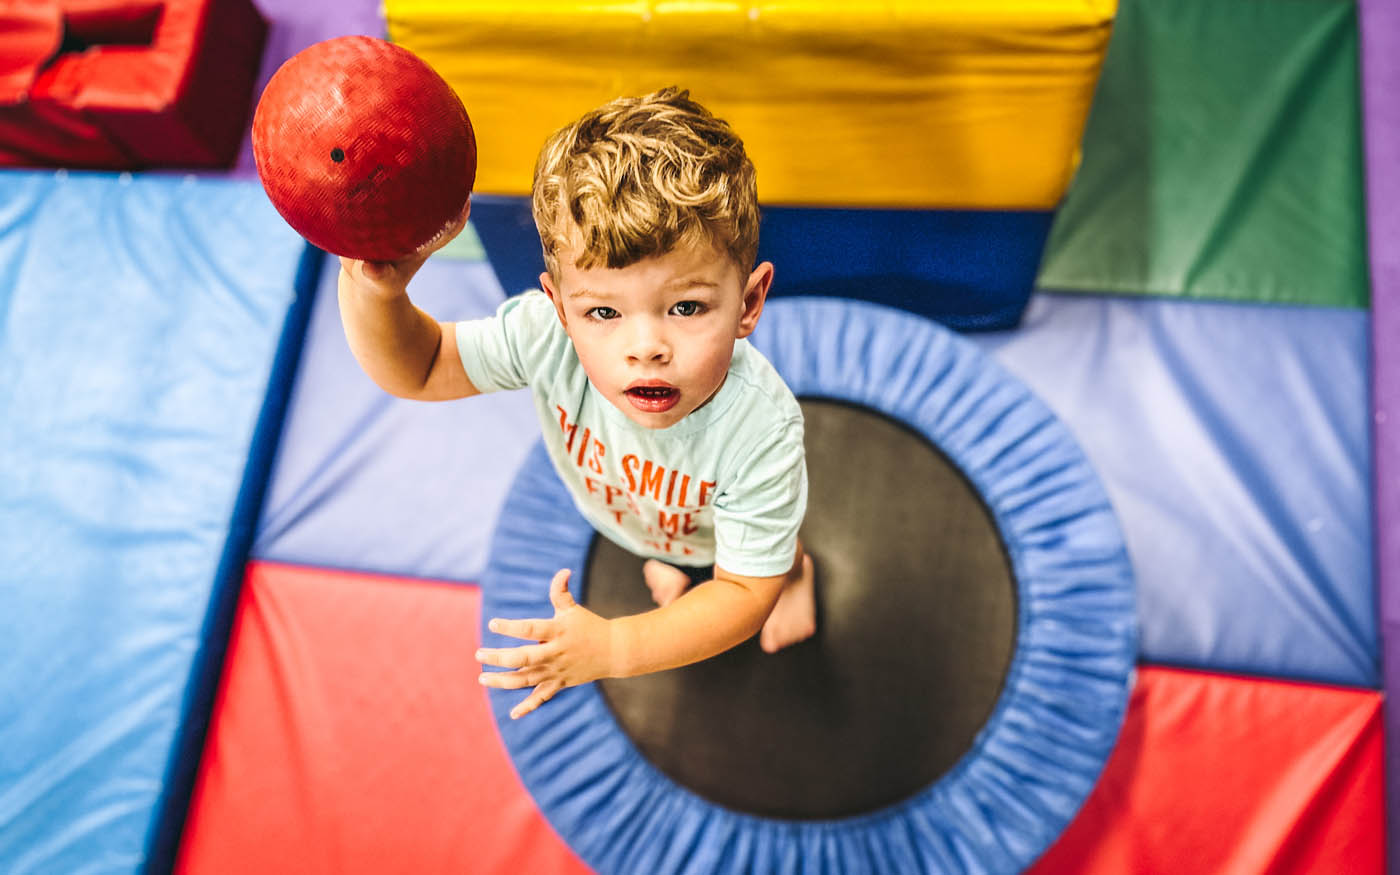 A toddler jumping on a Romp n' Roll tramp, learn more about our kids activities in Katy, TX.